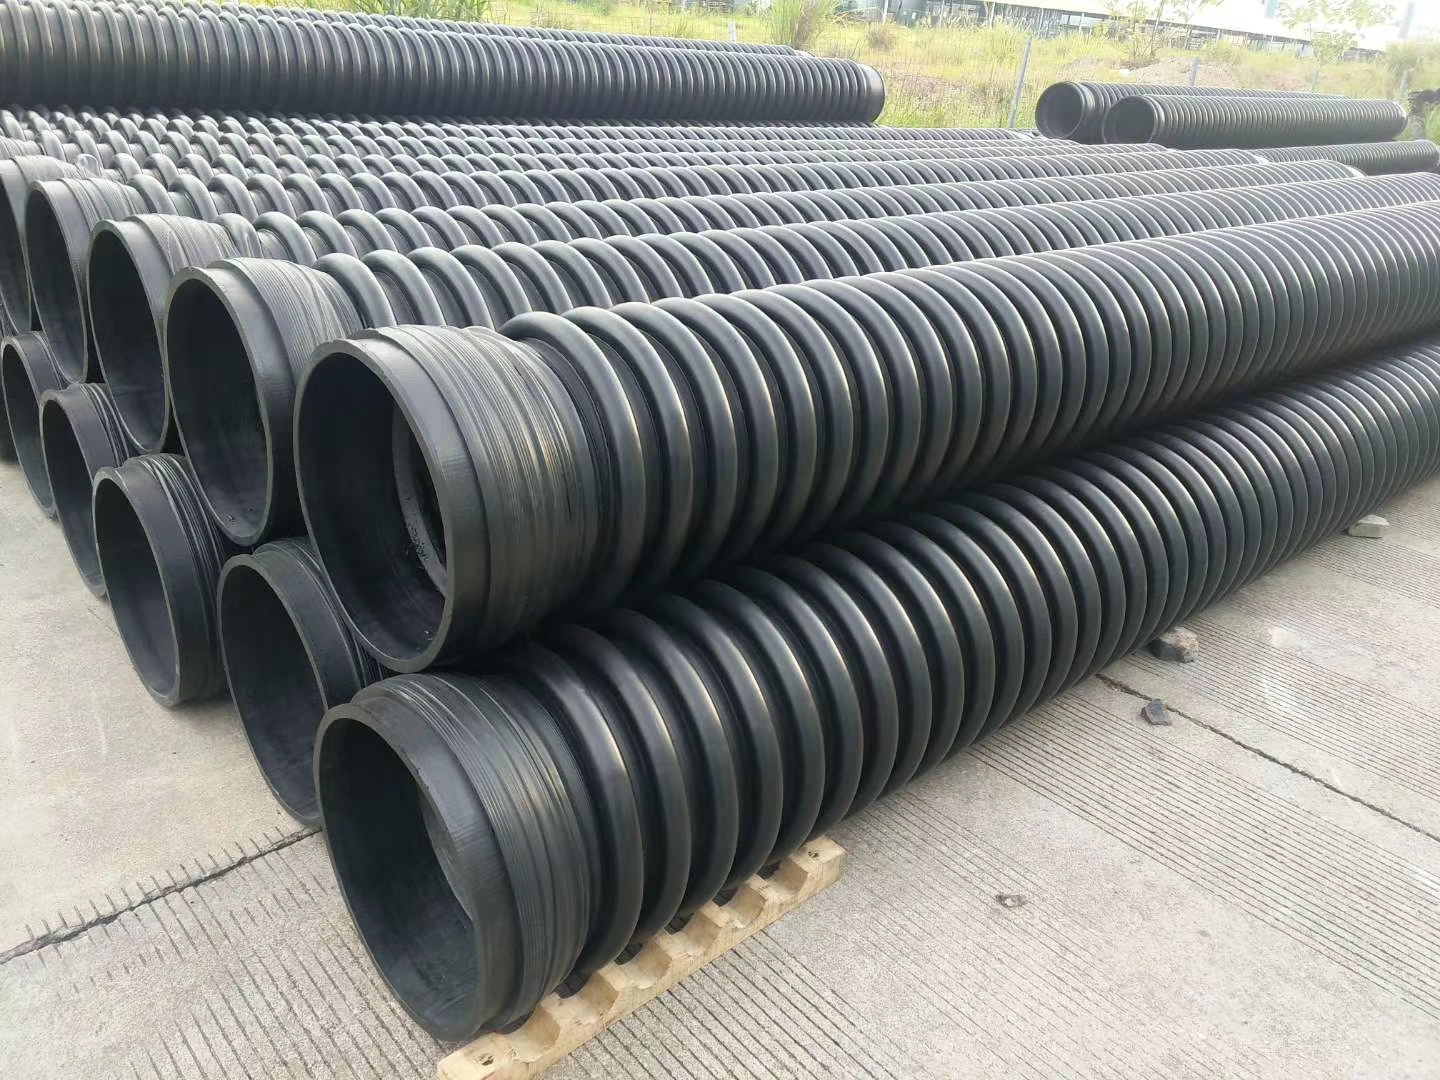 Krah Profiled Pipes for Non Pressure application